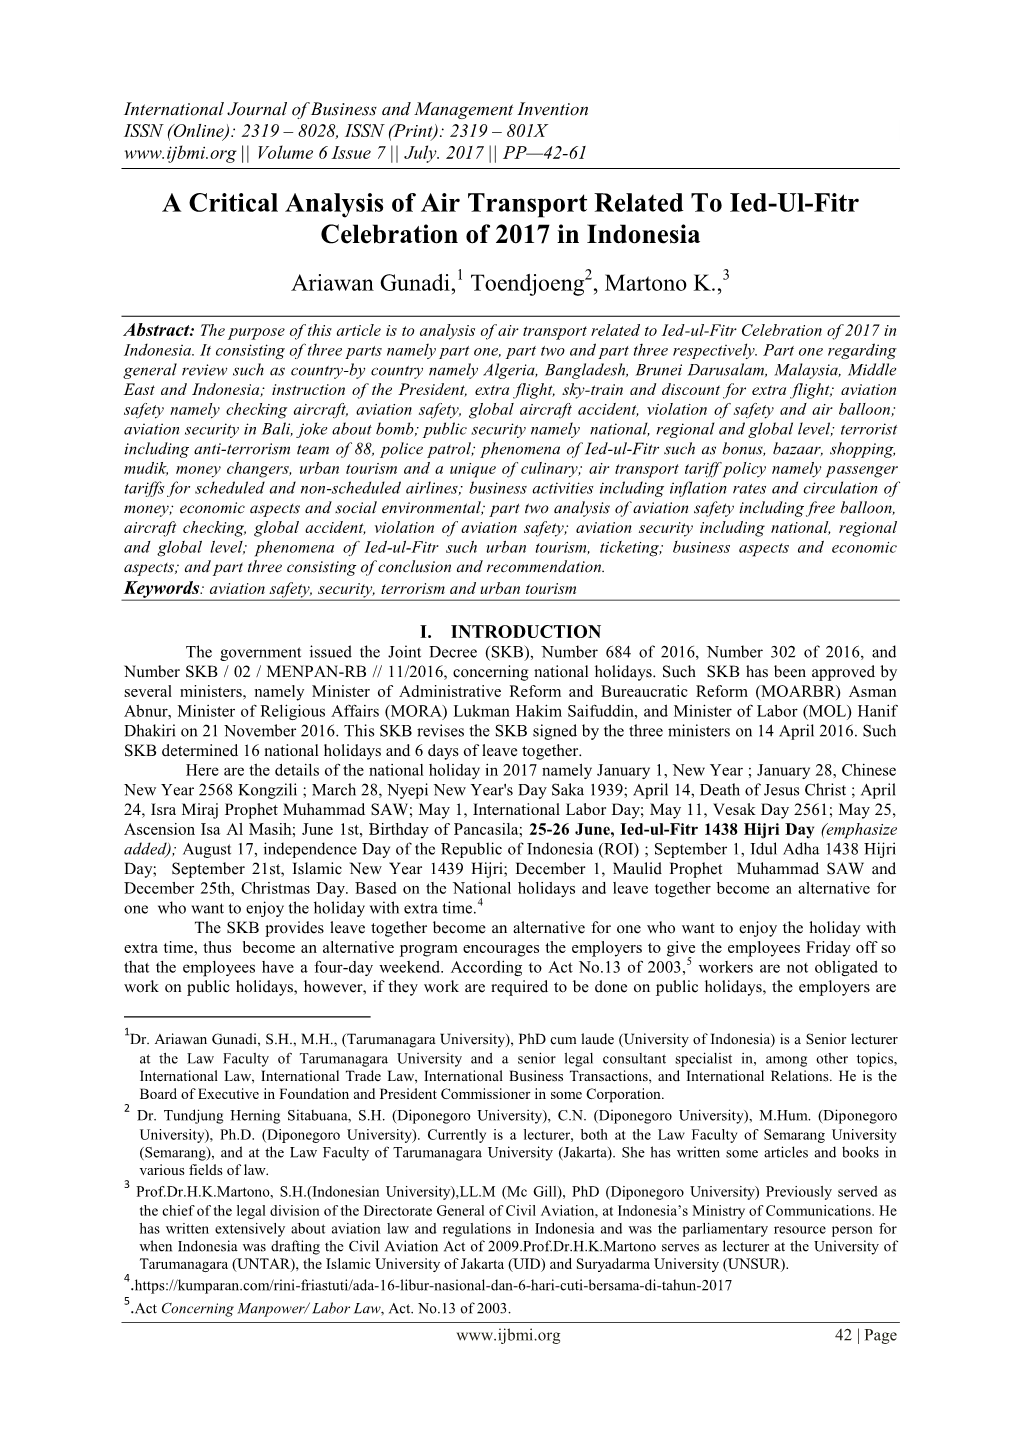 A Critical Analysis of Air Transport Related to Ied-Ul-Fitr Celebration of 2017 in Indonesia